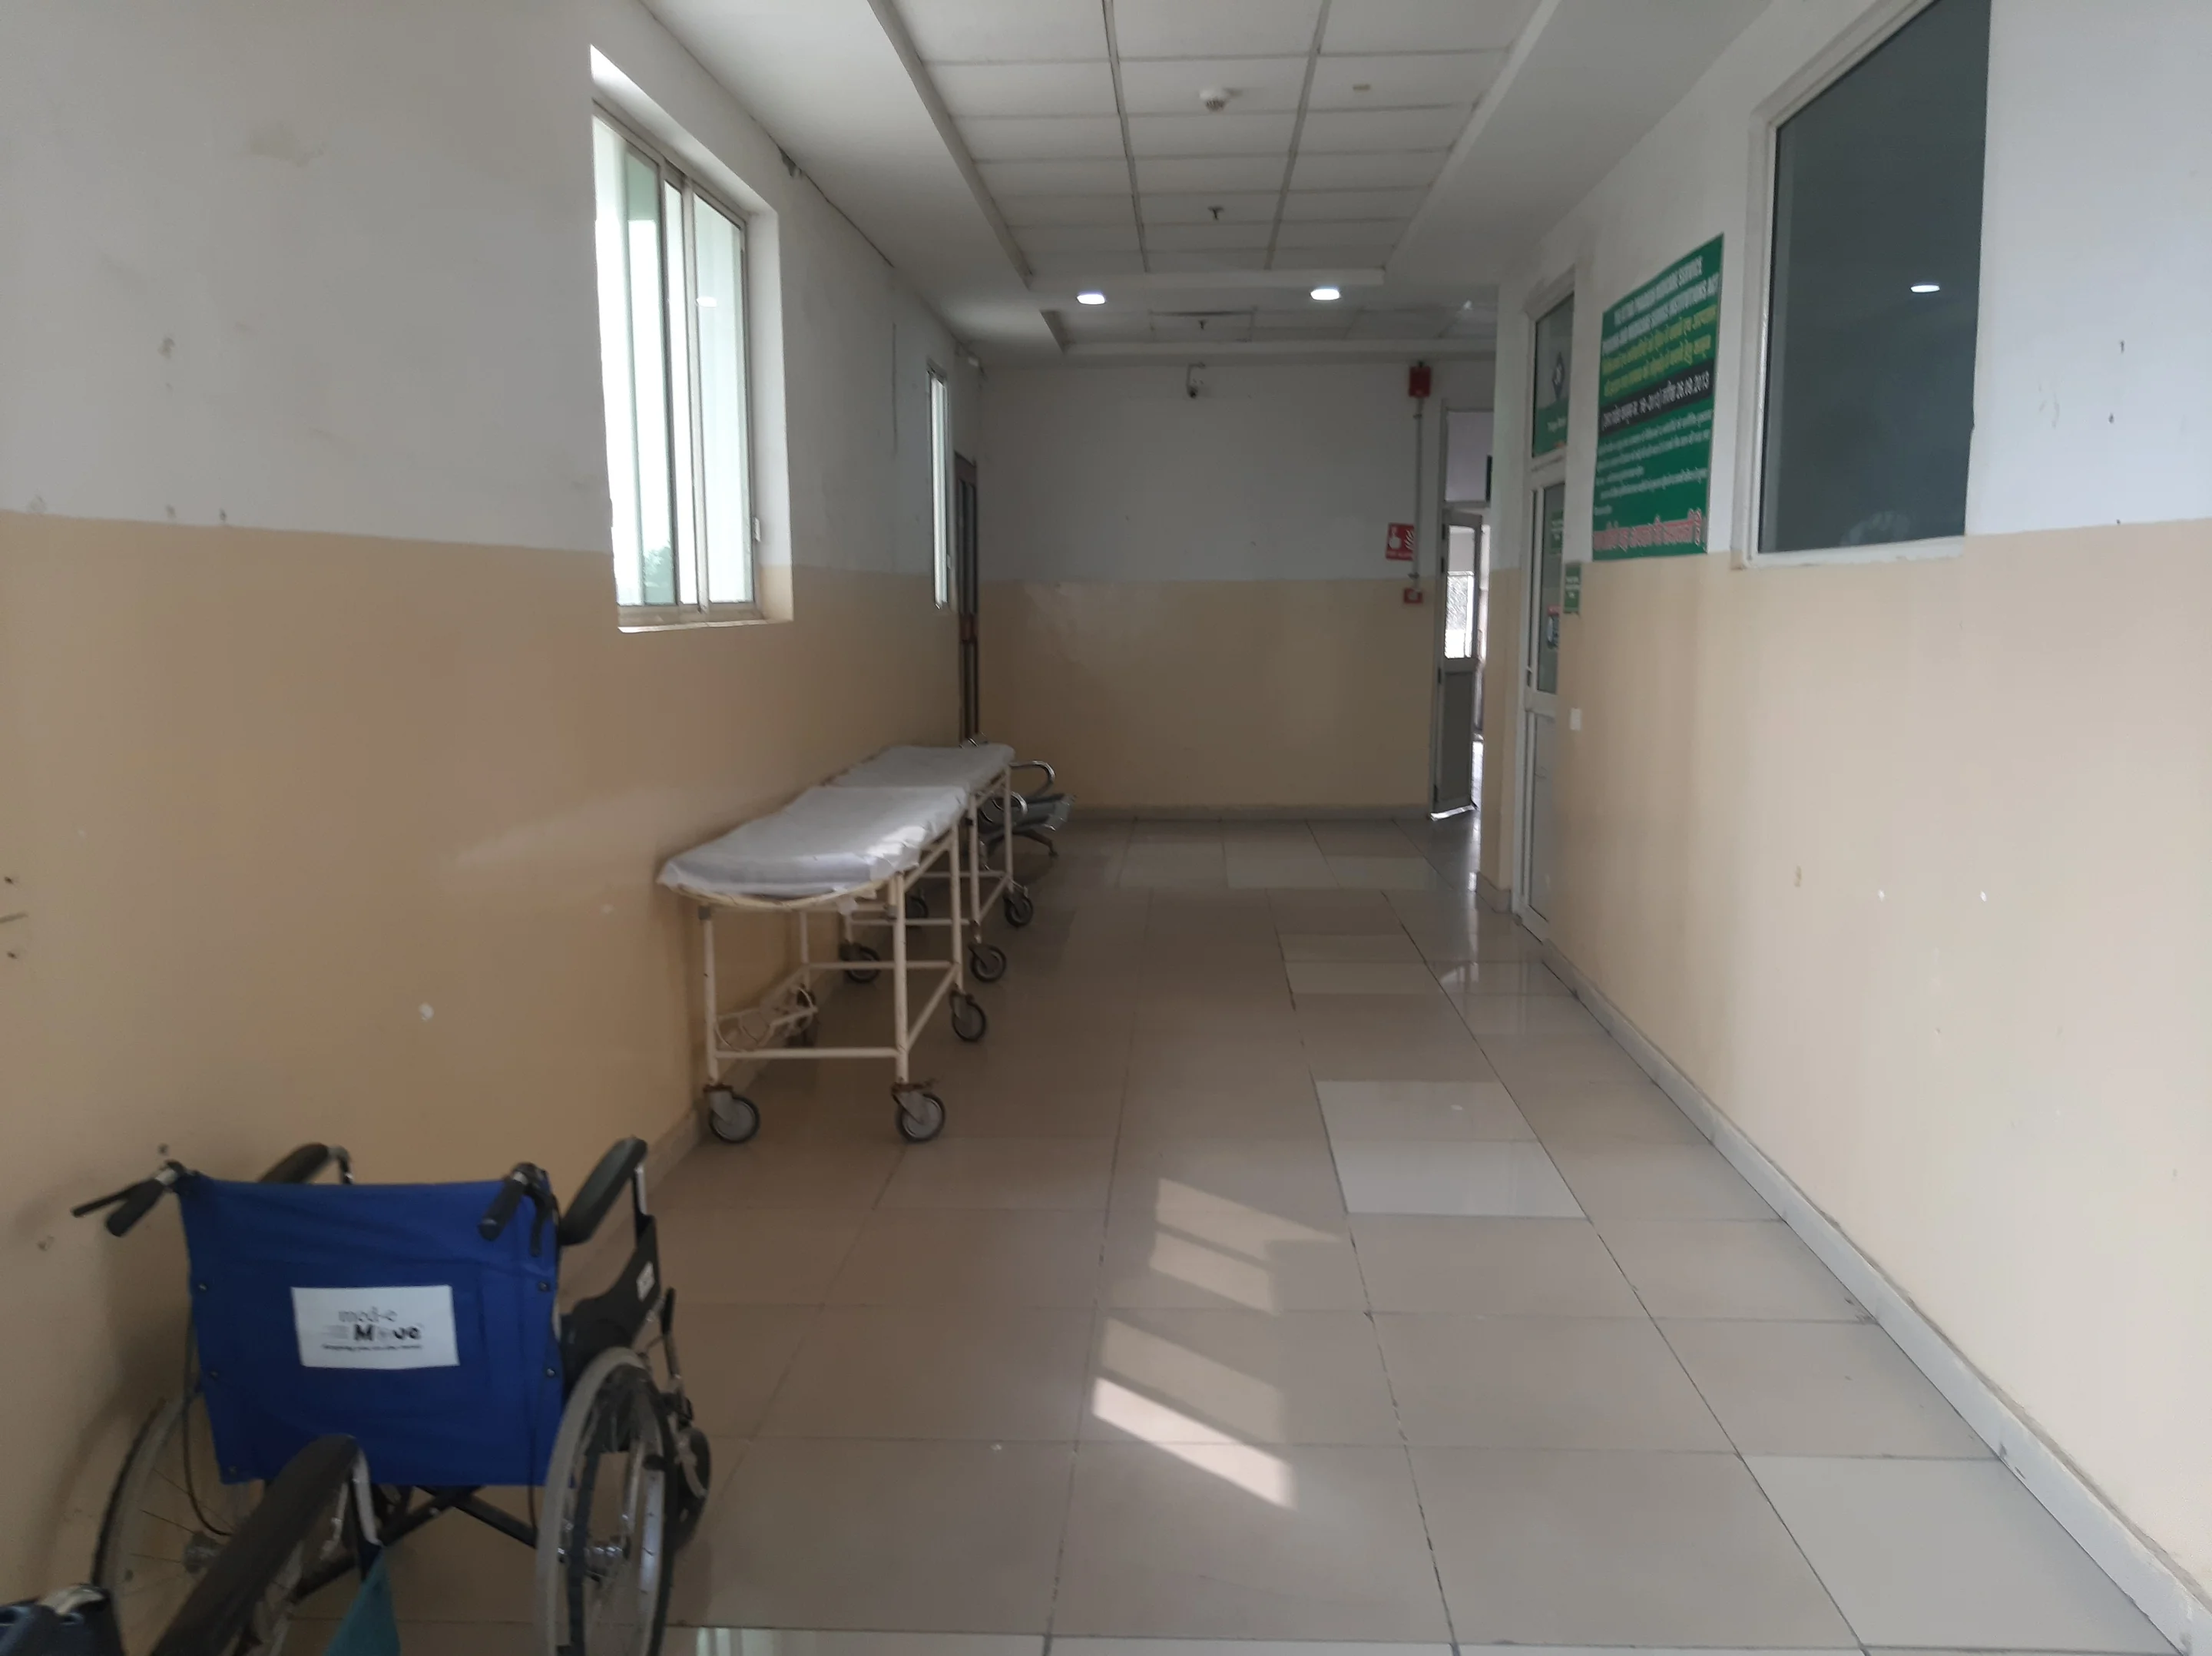 Emergency Casualty Reception Area of GS Hospital